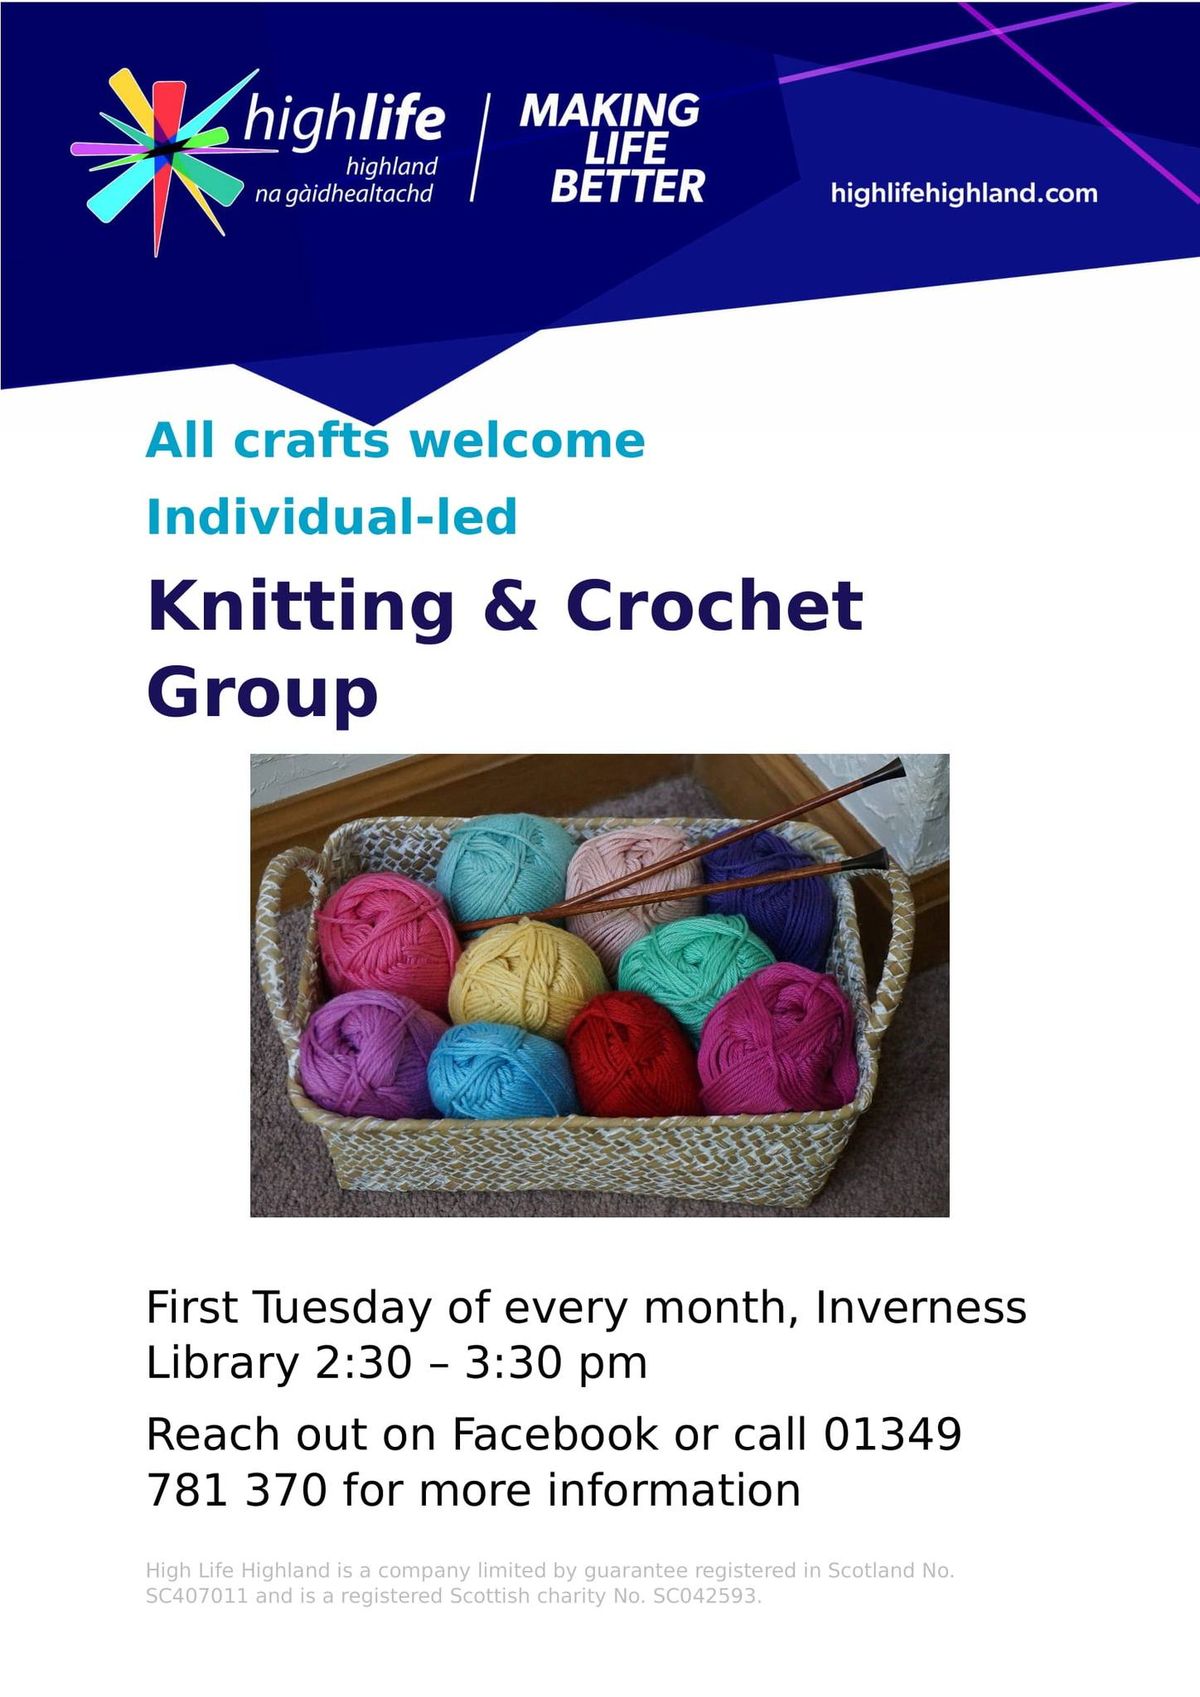 ?Knitting & Crochet Group? Tuesday 4th June @ 2:30pm